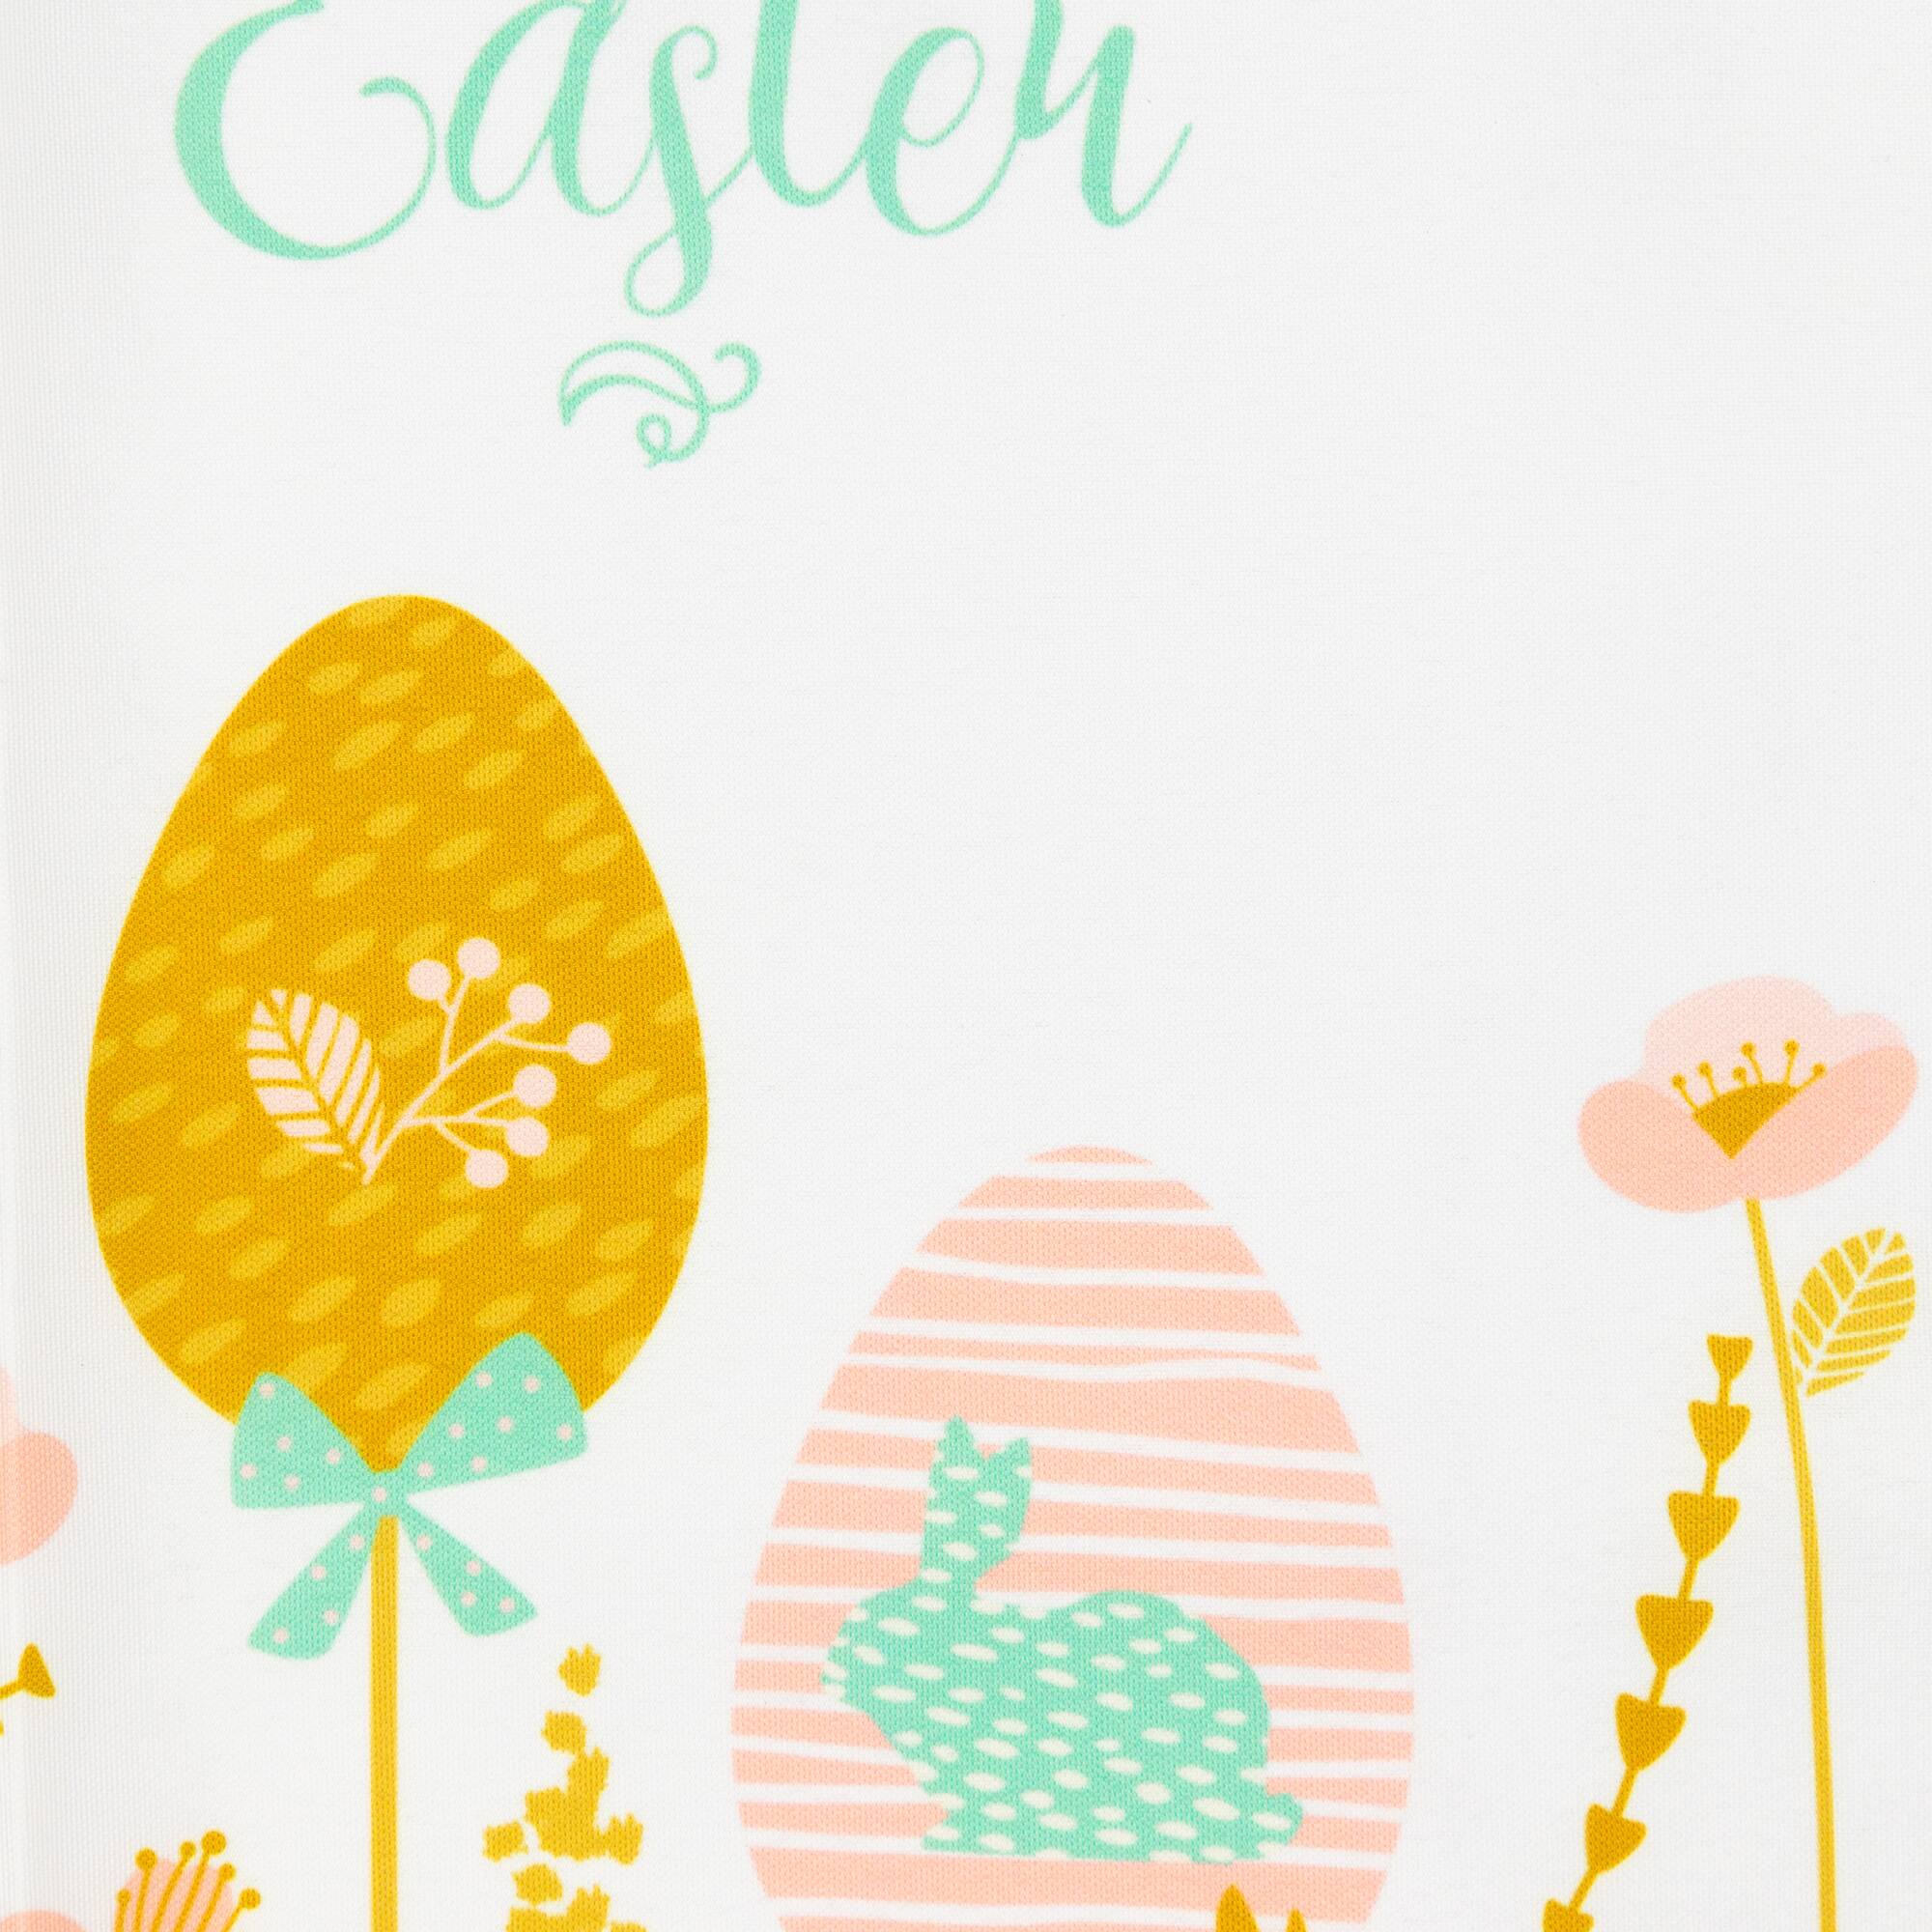 Pastel Happy Easter Eggs Floral Placemats, 4ct.